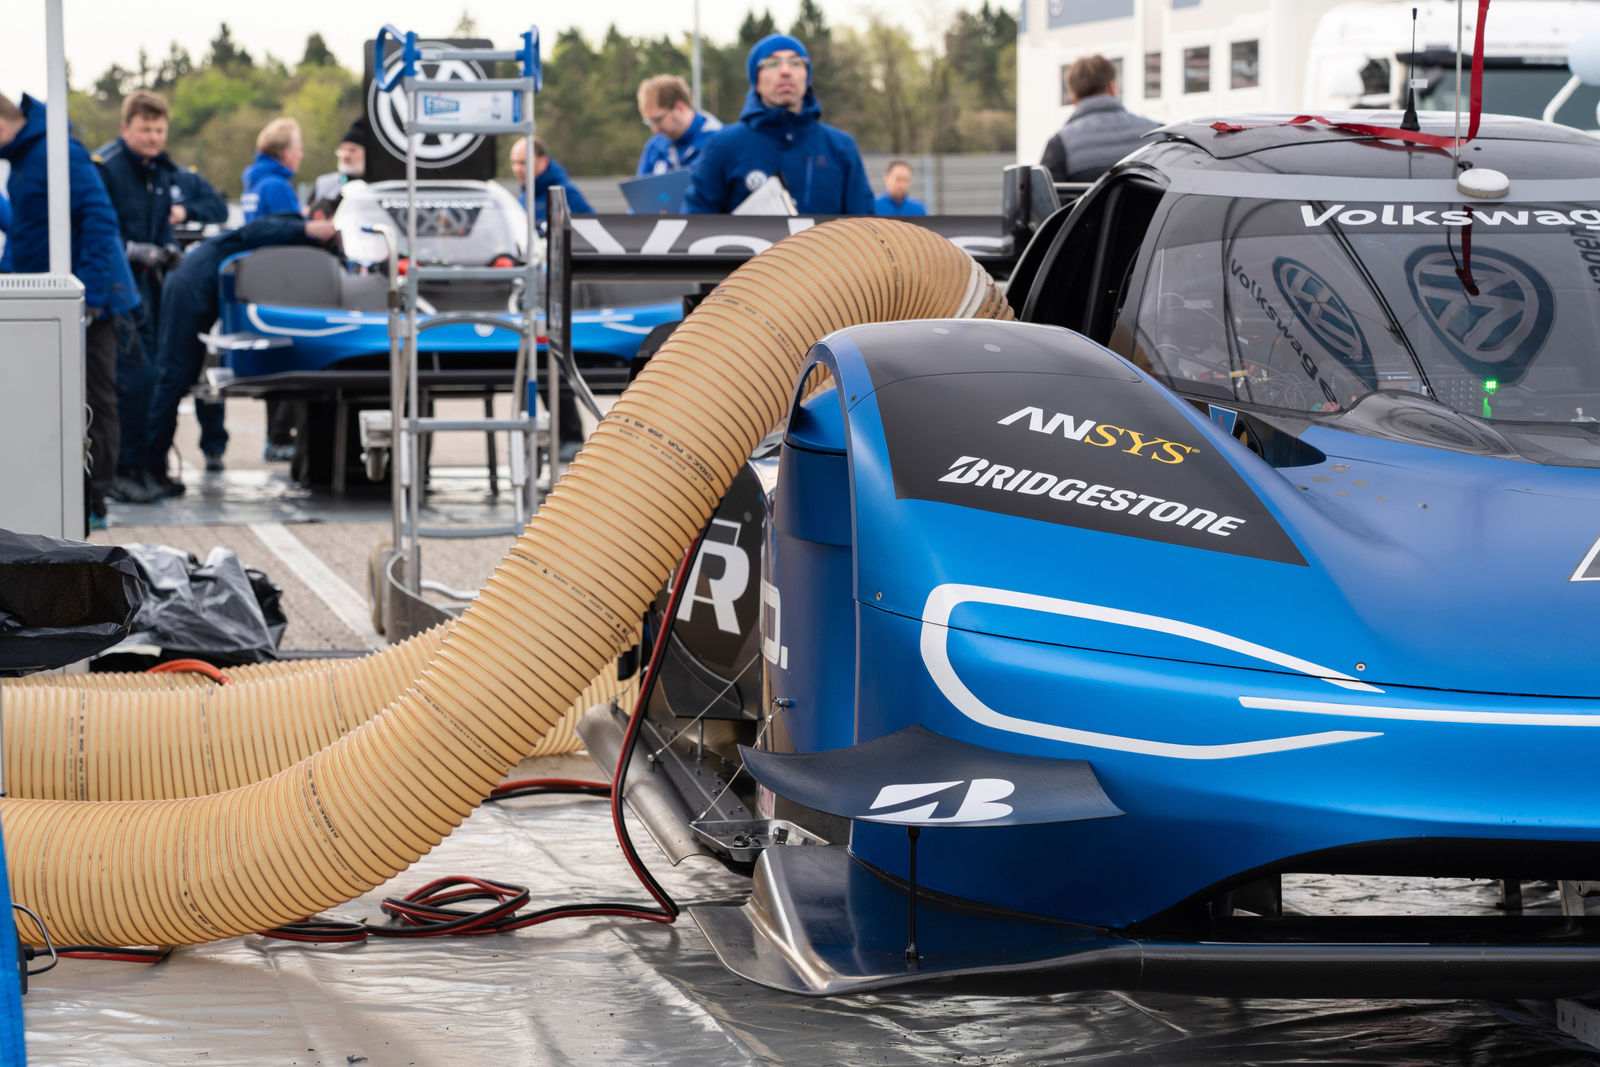 A vessel for technology beyond motorsport – the charging of the ID.R system